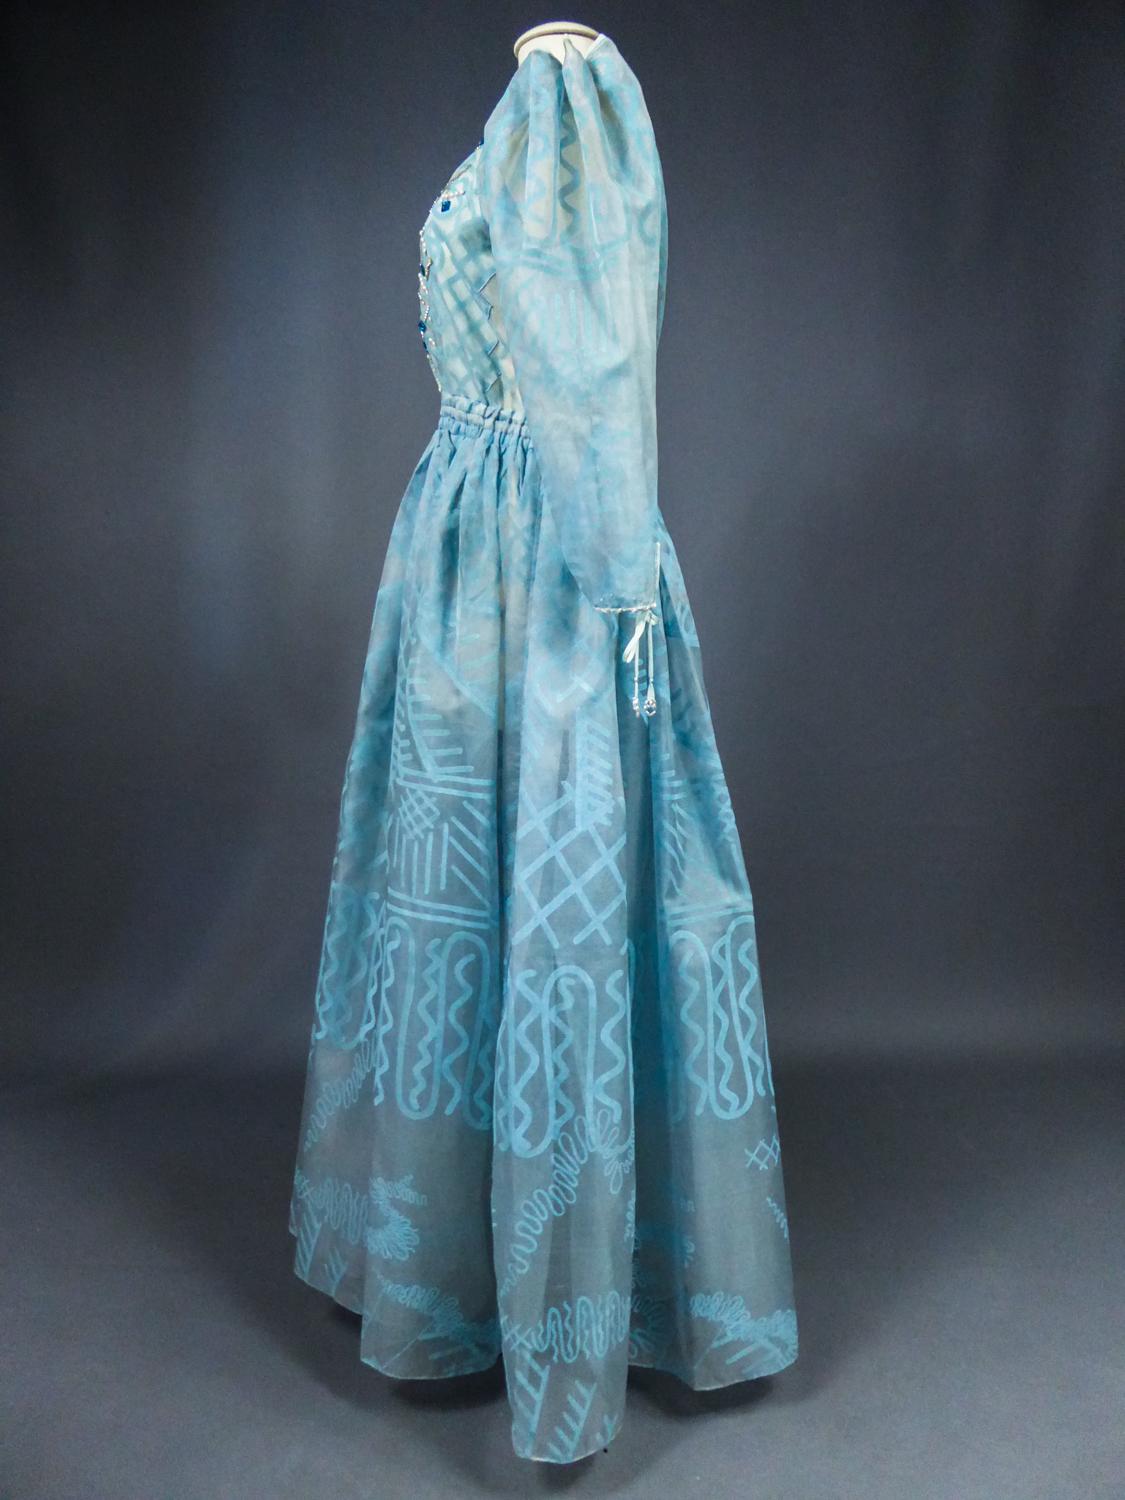 A Zandra Rhodes Evening Dress in Printed Organza - Fortuny Influence- Circa 1980 For Sale 8